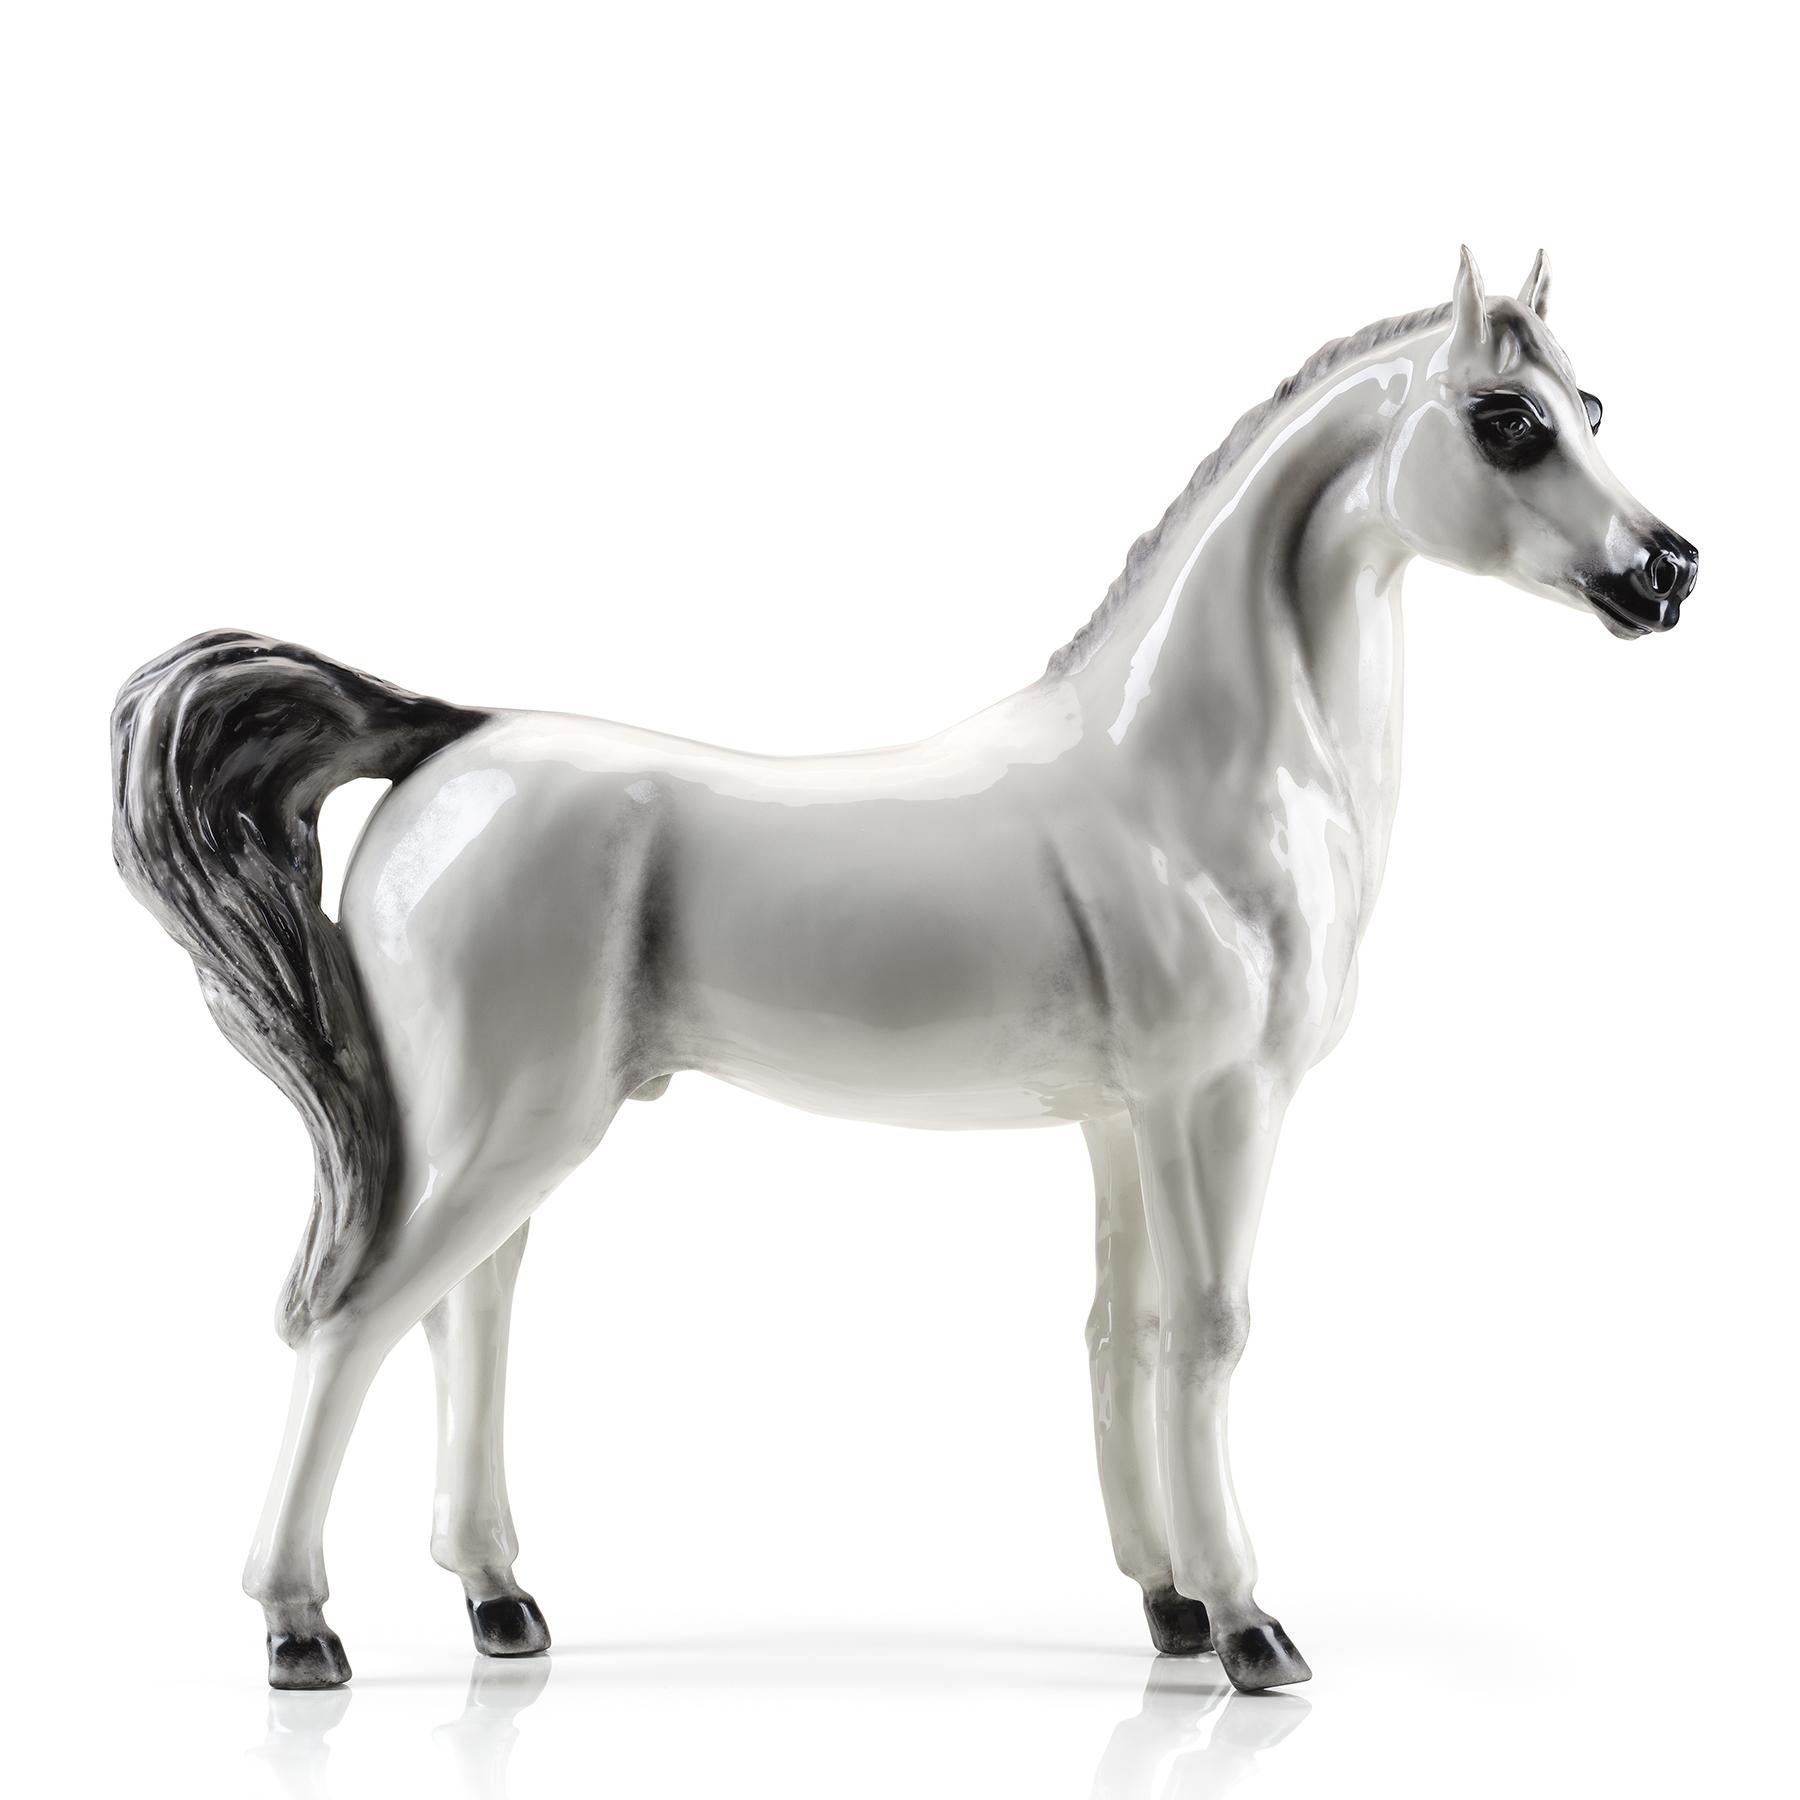 Sculpture white pure bred Horse all
made in hand painted porcelain. 
Exceptional piece.